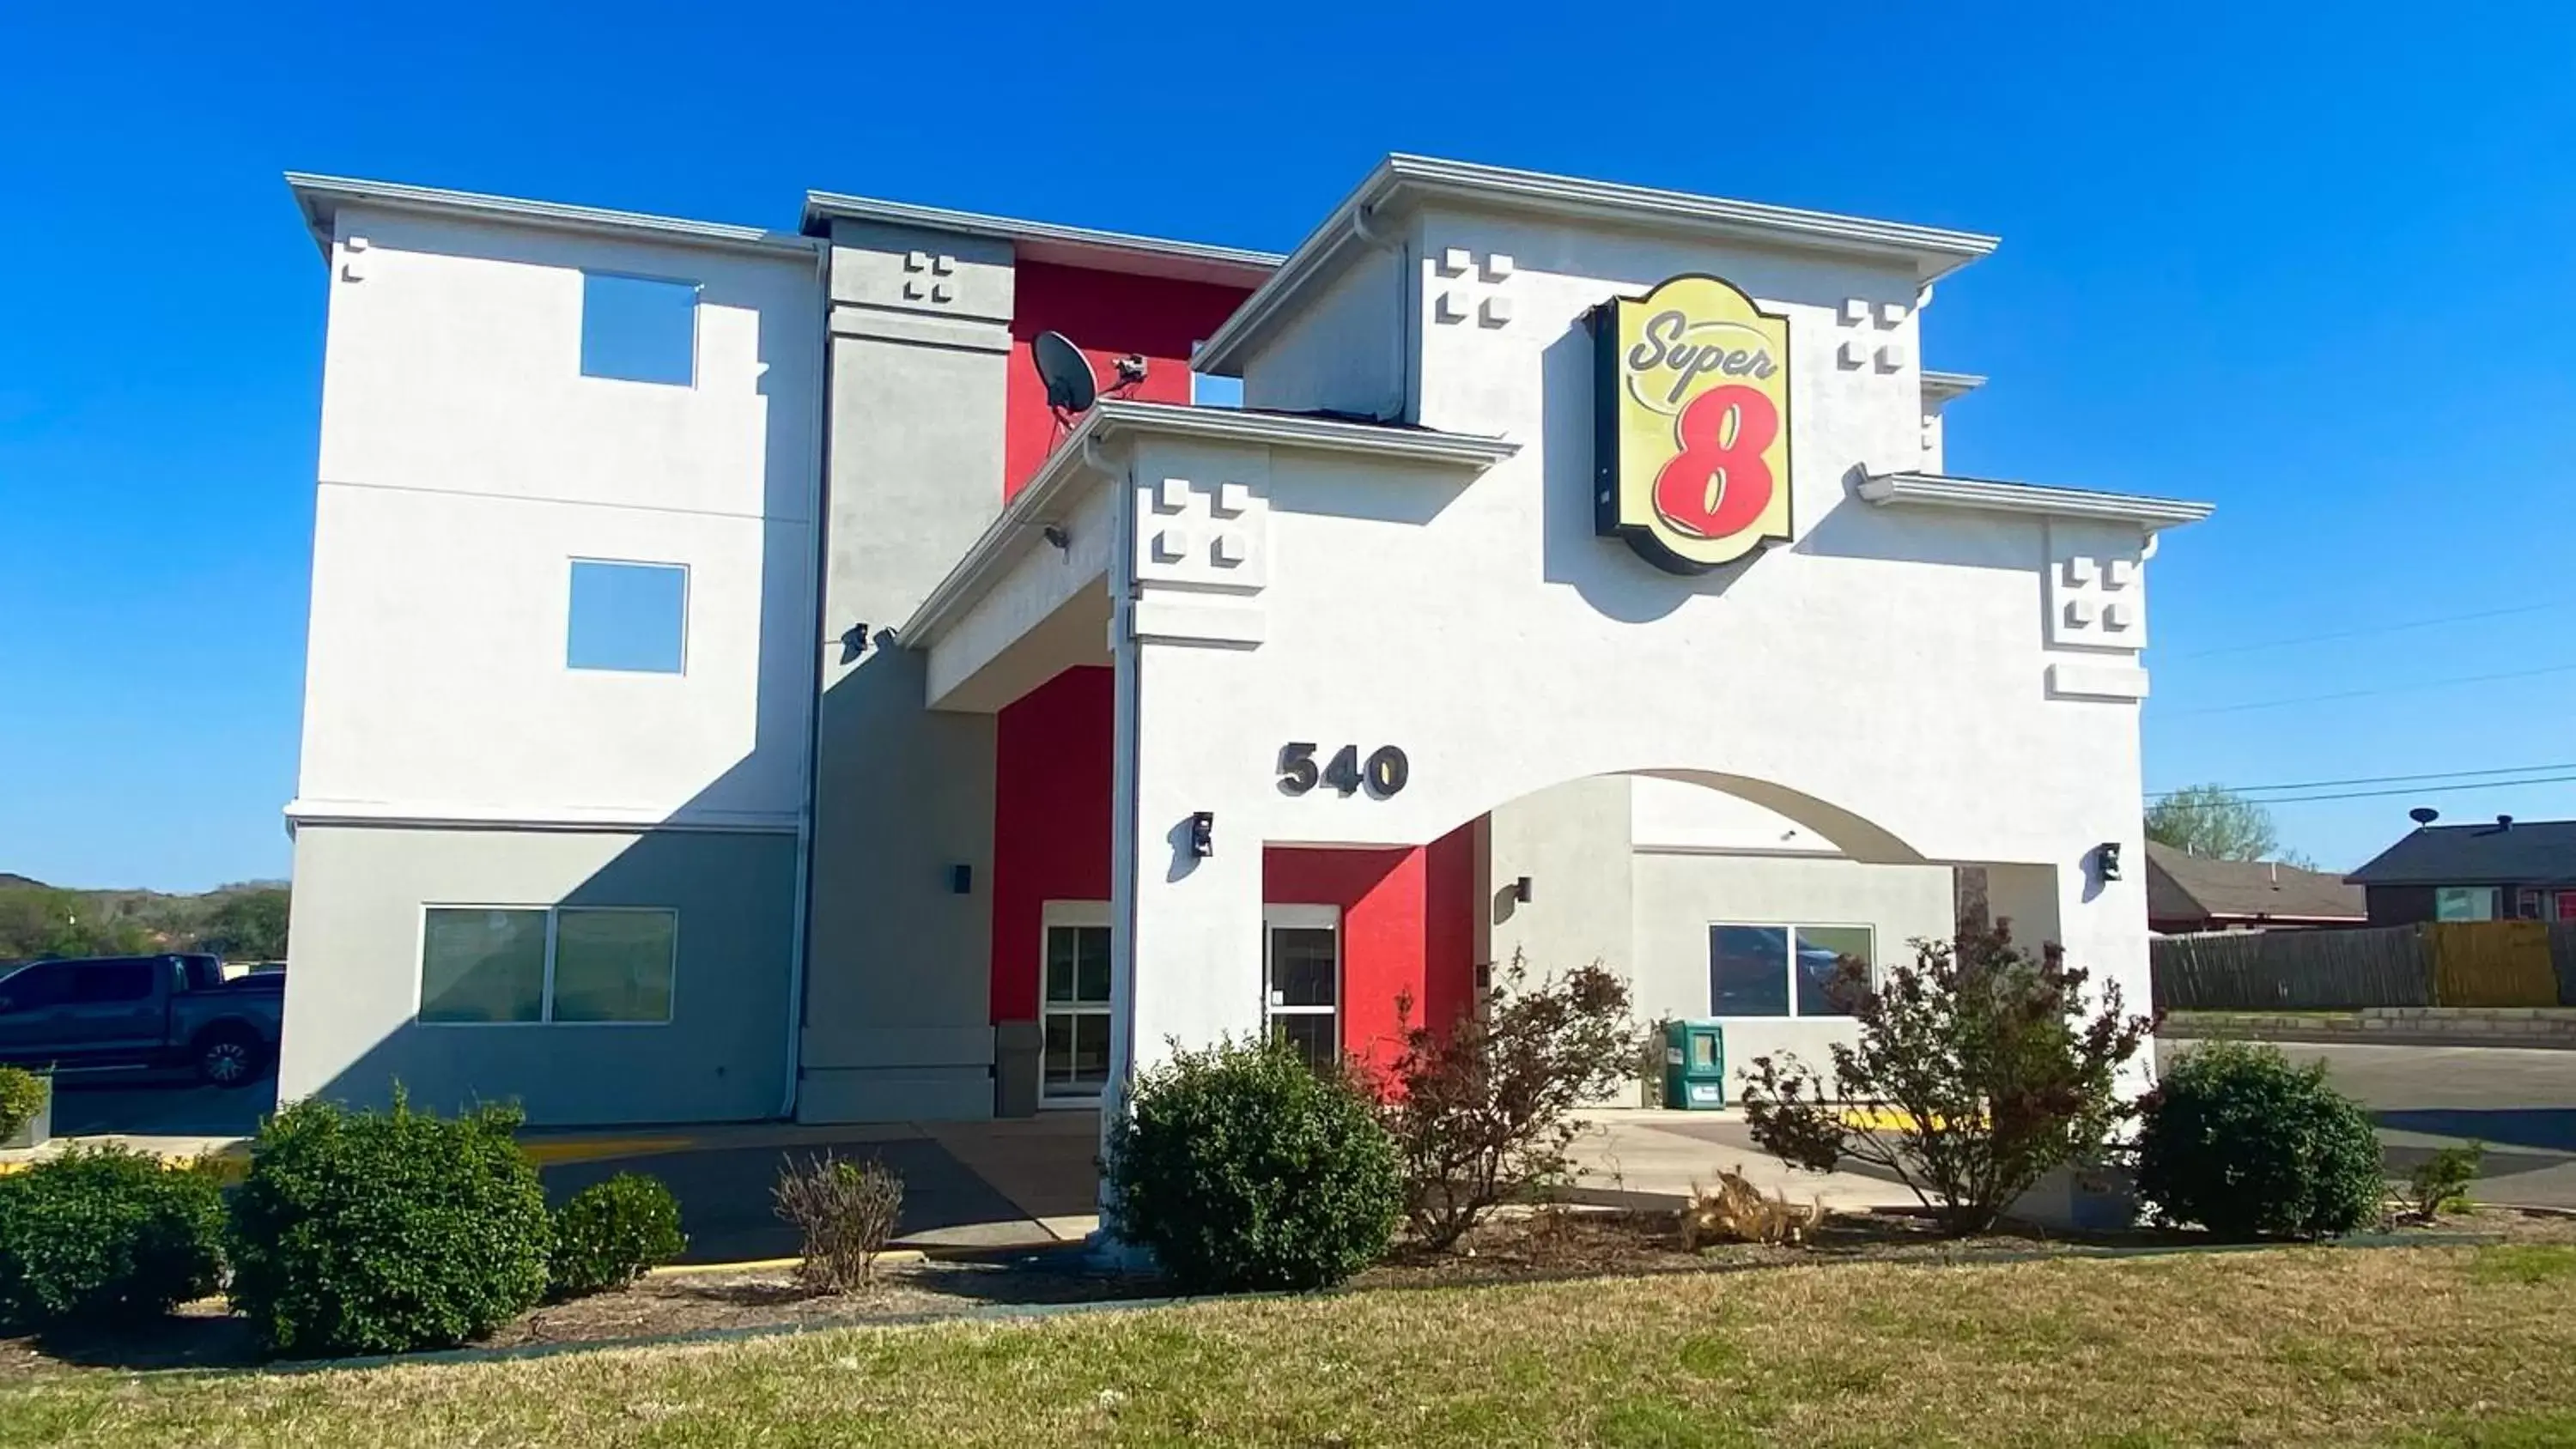 Property Building in Super 8 by Wyndham Harker Heights Killeen Fort Hood